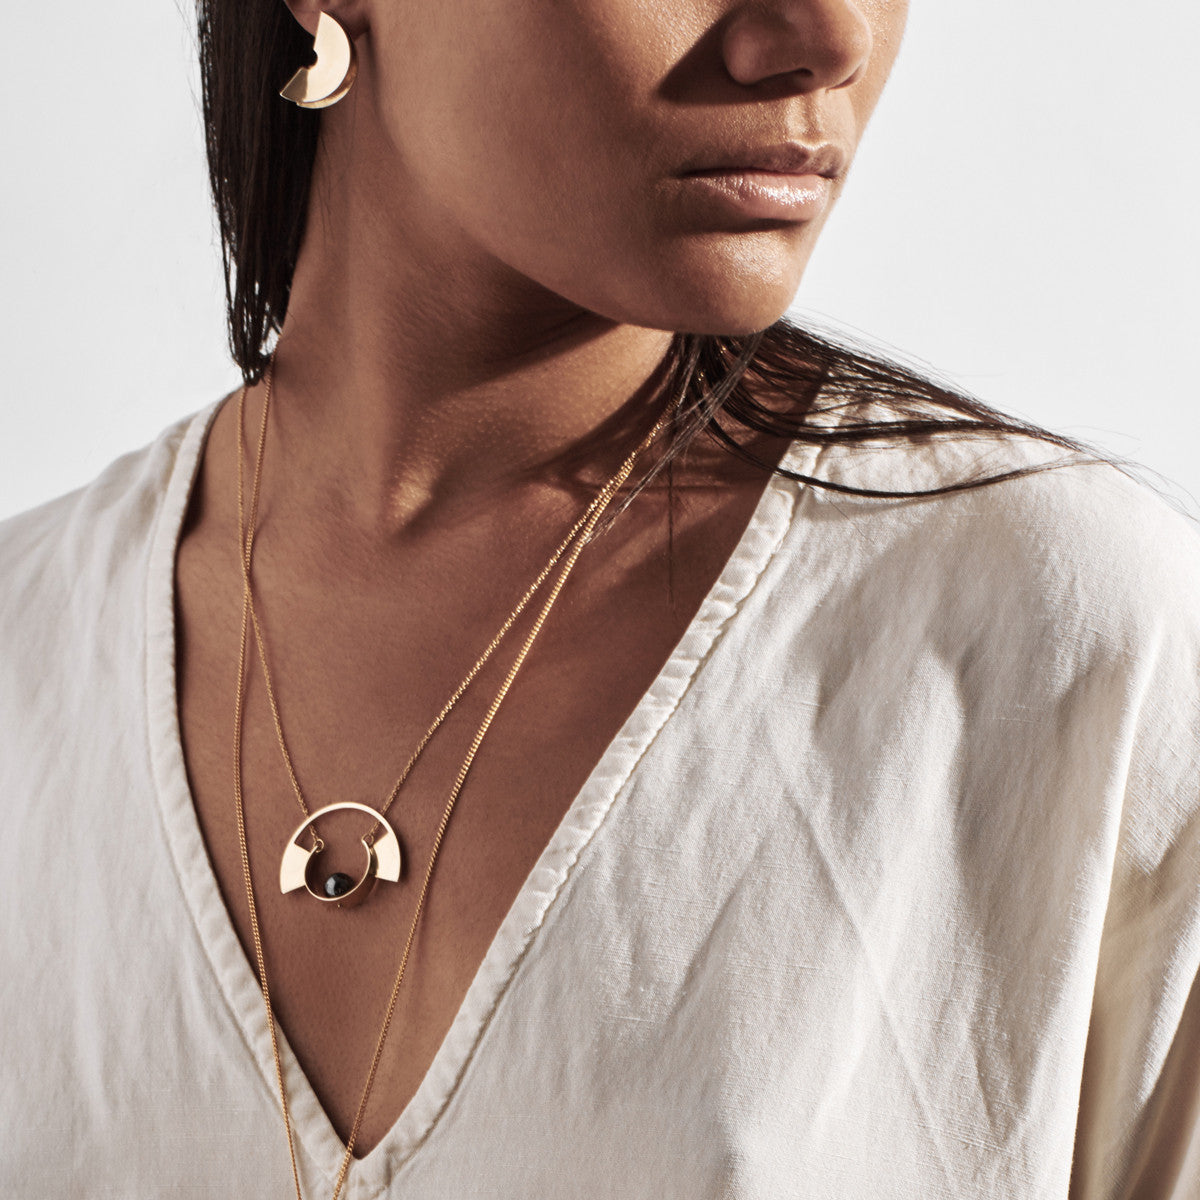 Metalepsis Jewelry - Lygia Earring and Yuyu Necklace